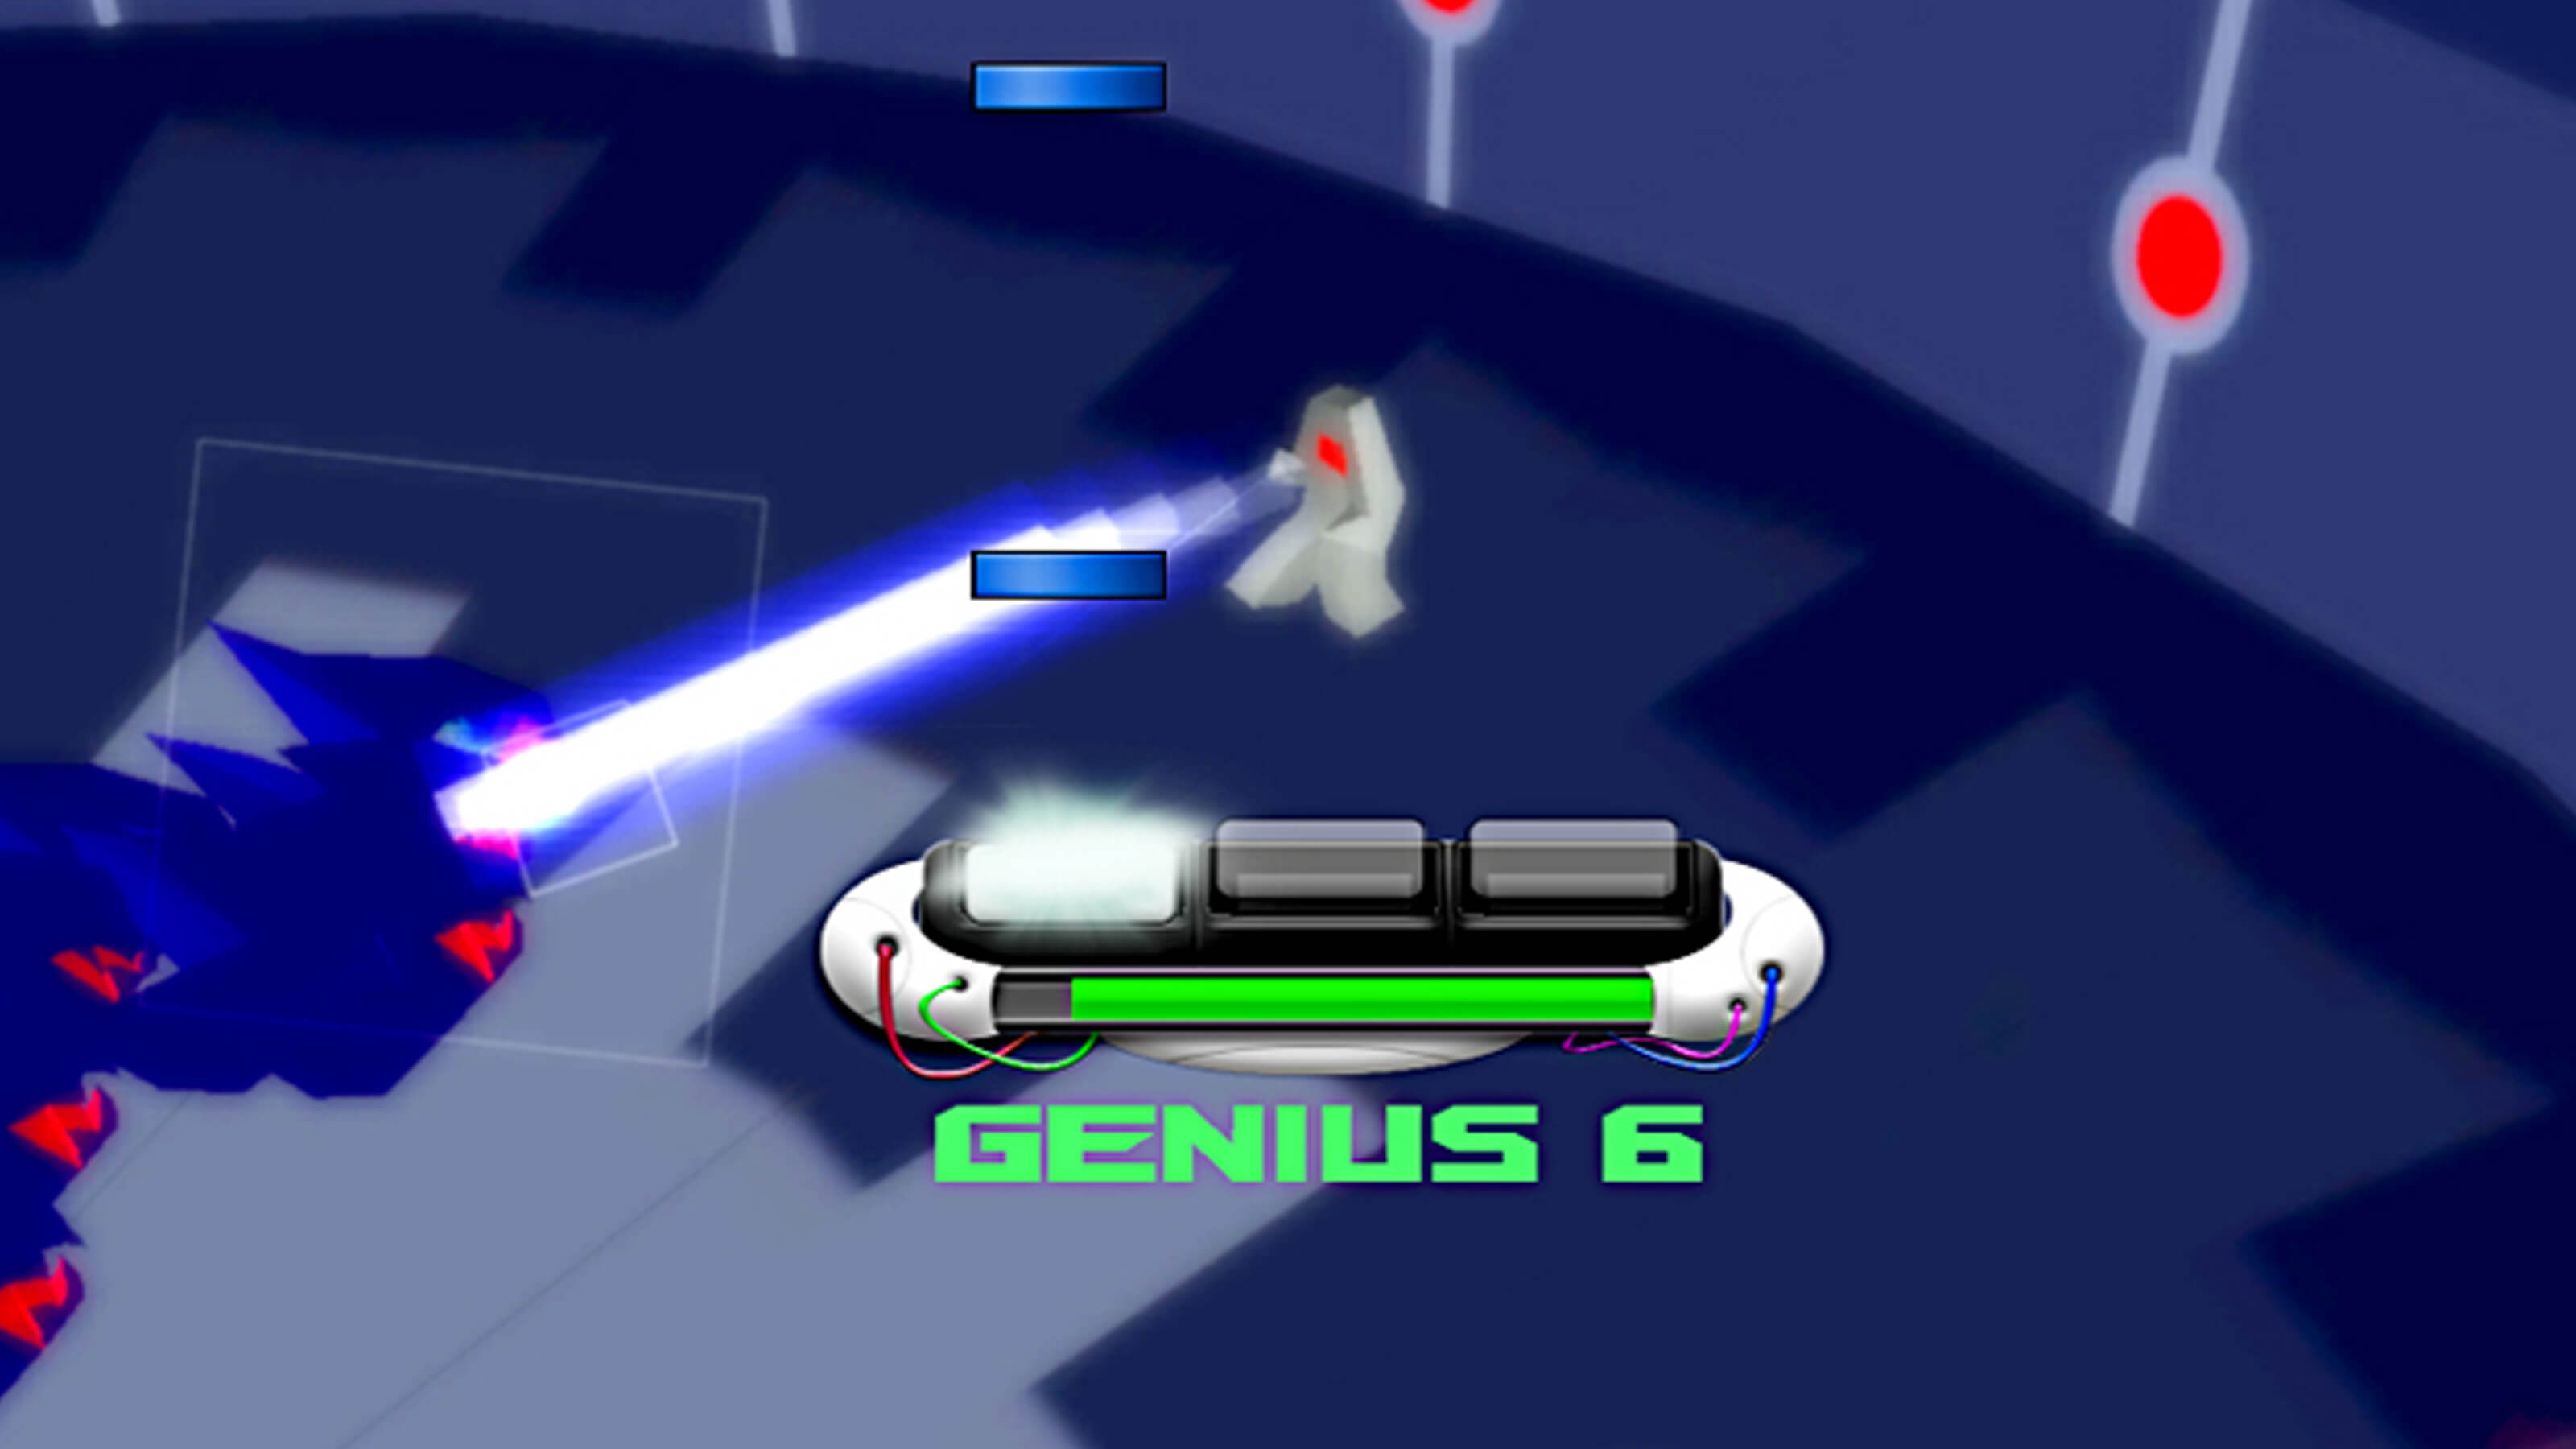 A blue dash falls towards a console with the word "GENIUS 6" written below it.